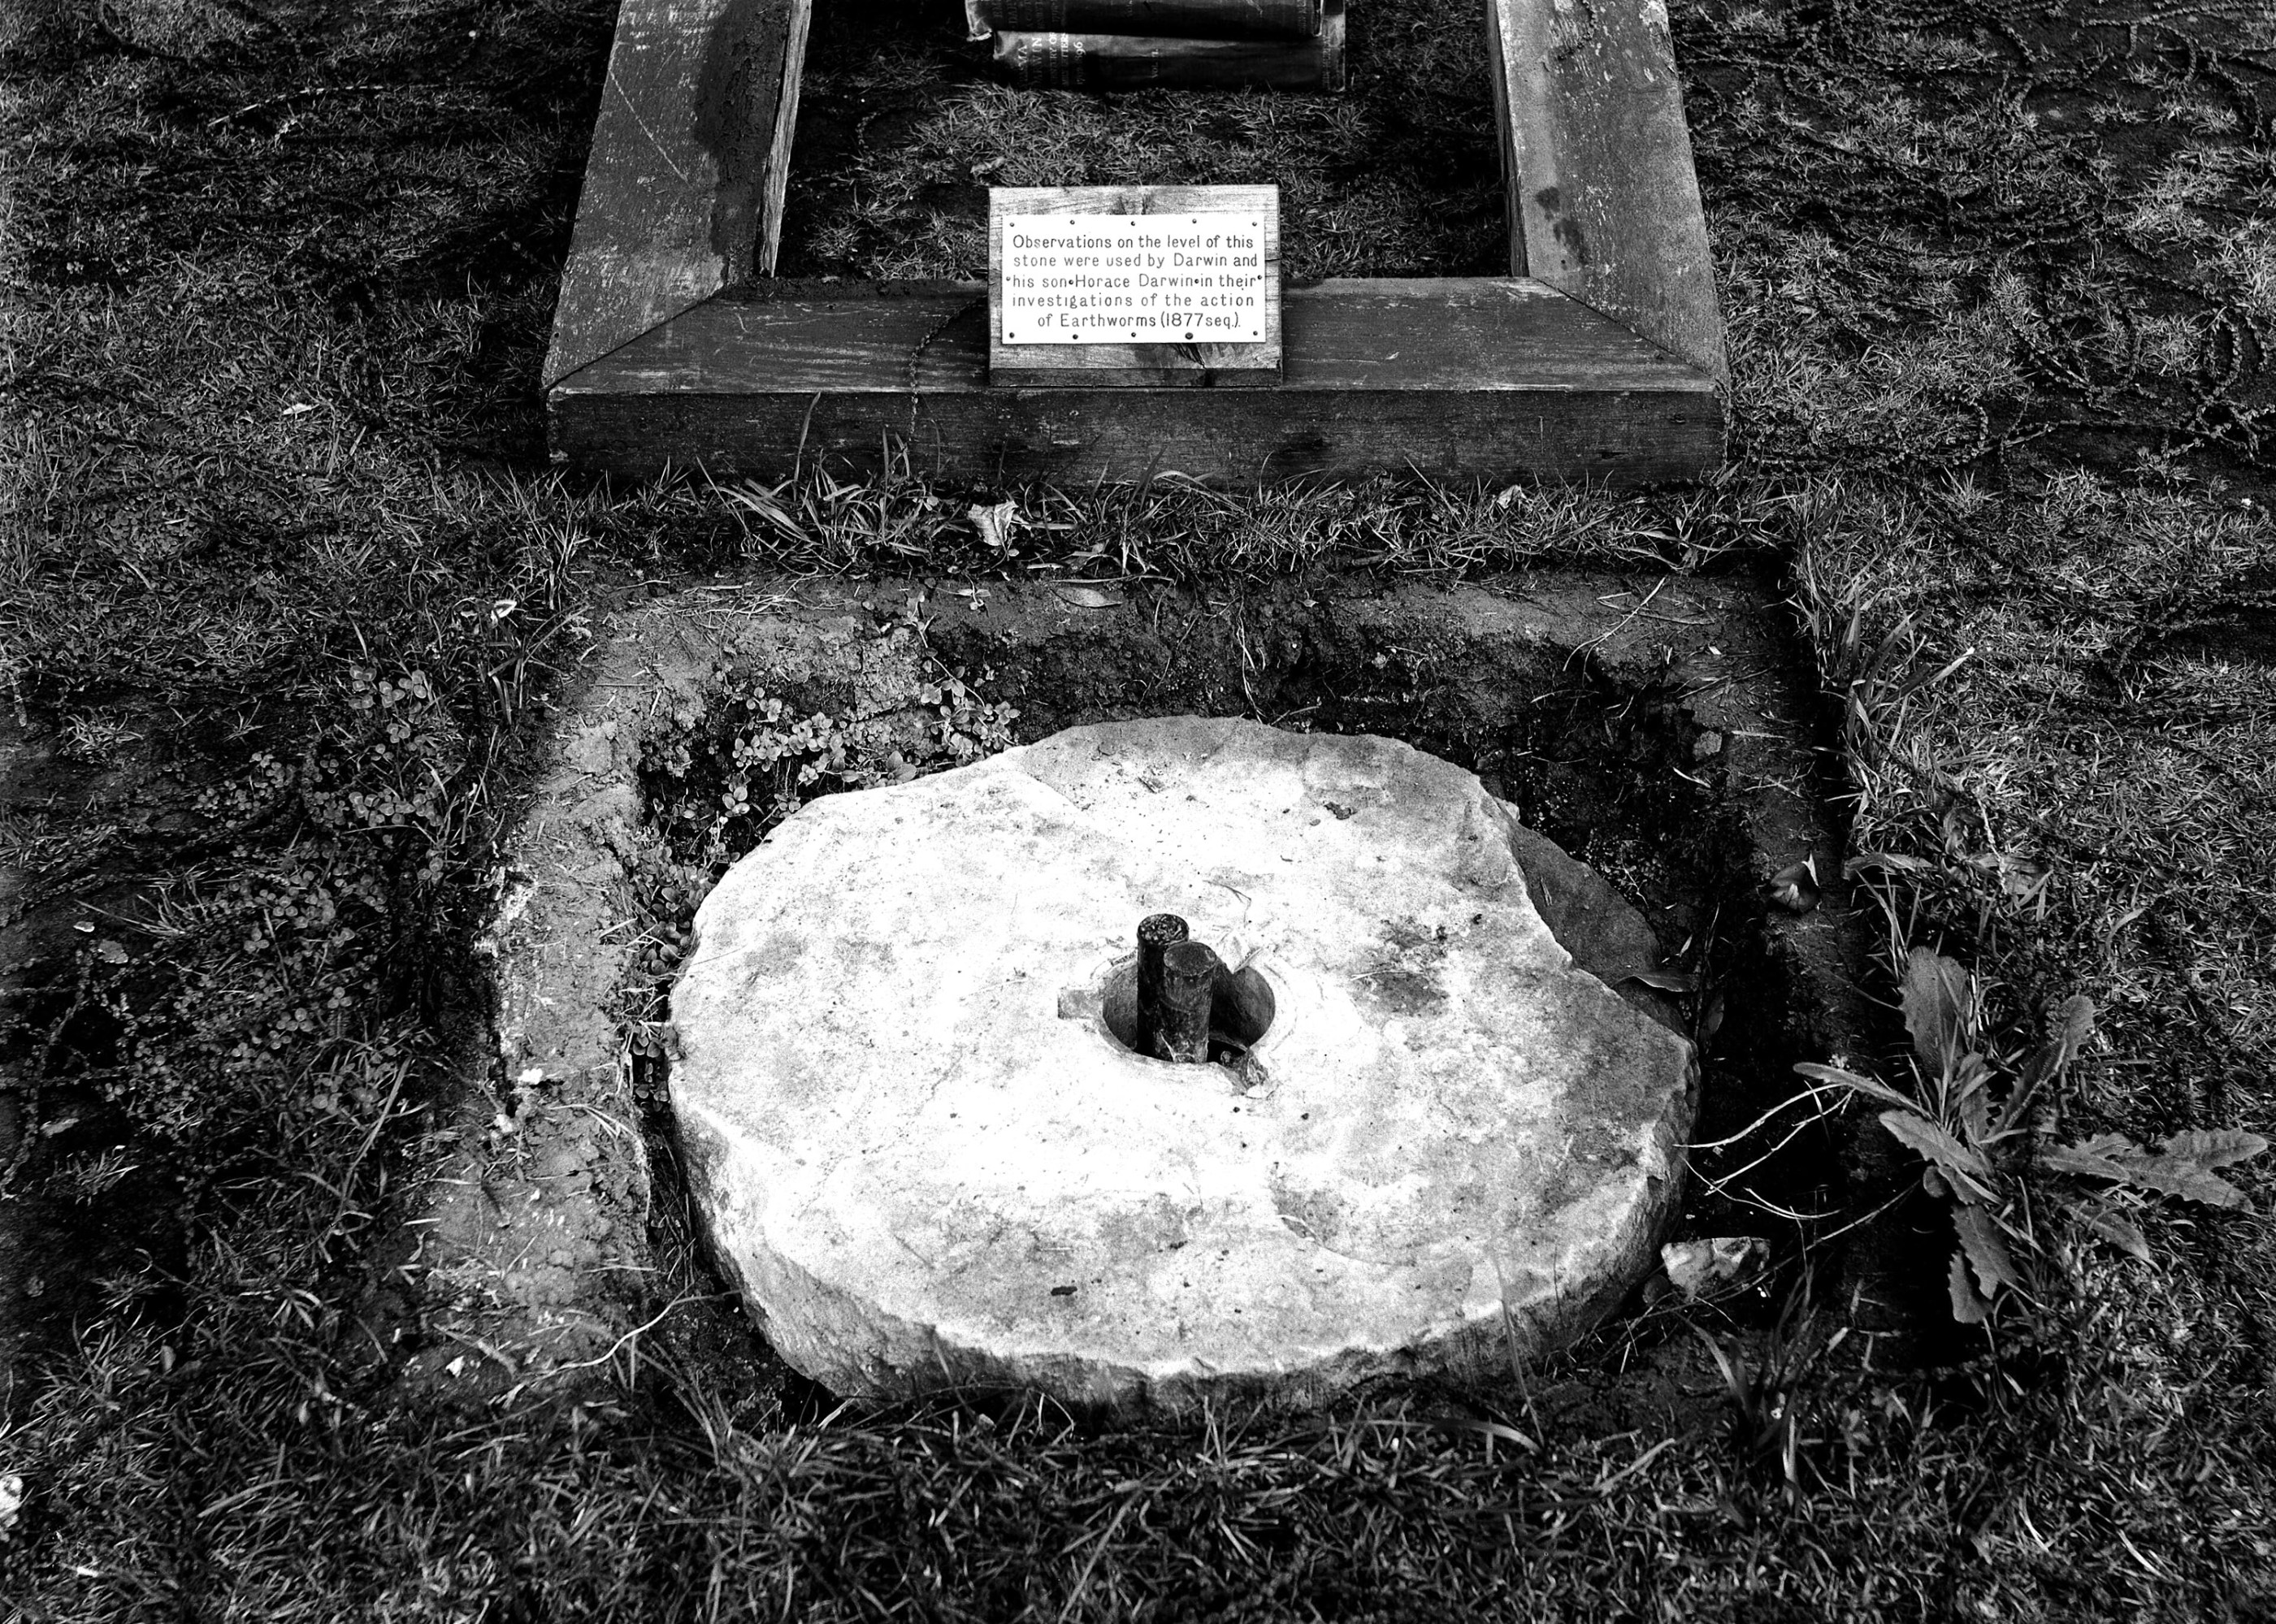 round stone inset in the earth with plaque that reads, "Observations on the level of this stone were used by Darwin and his son Horace Darwin in their investigations of the actions of Earthworms (1877.)"